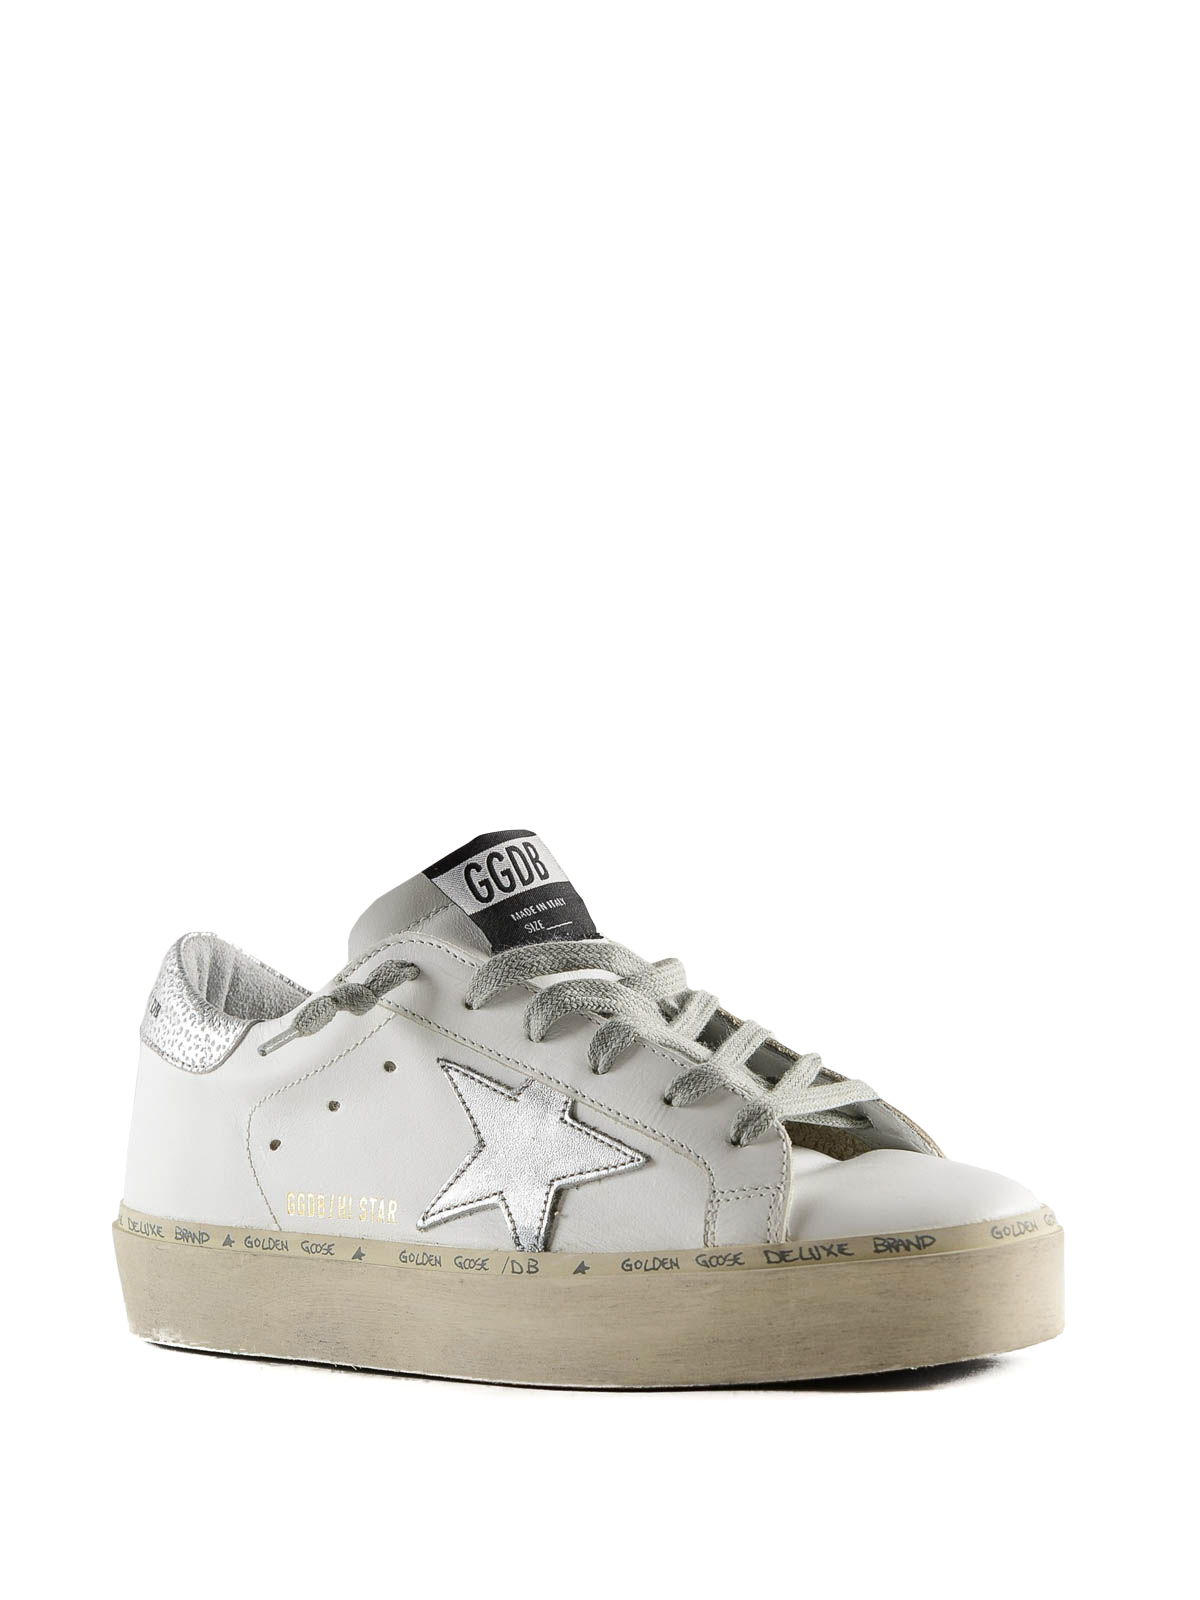 white leather star trainers